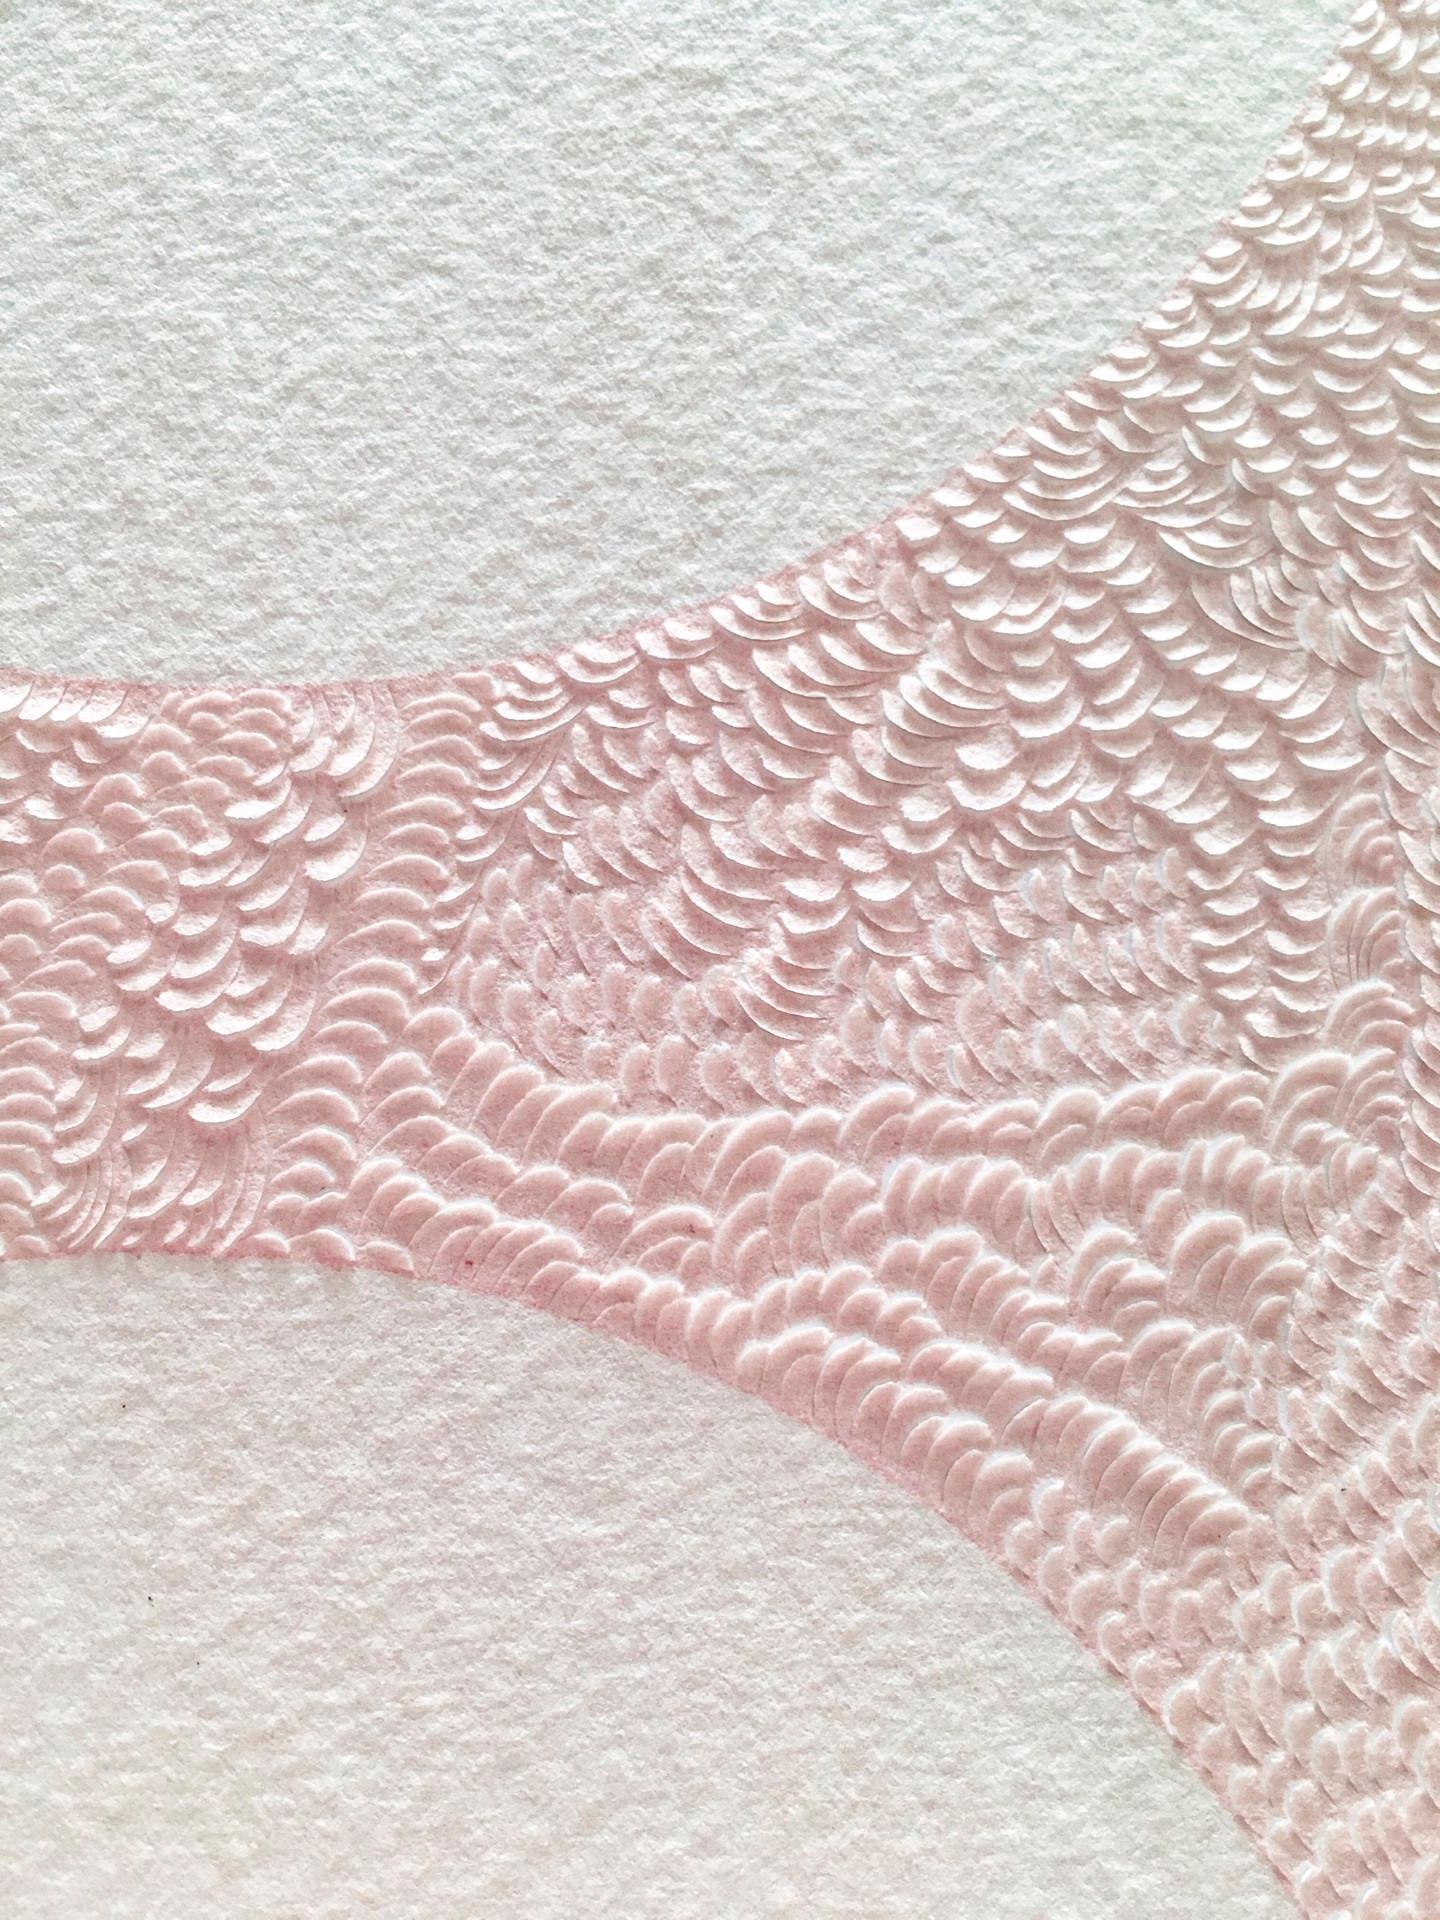 Knife Drawing XXIV - Manipulated Textured Paper with Stunning Detail (Pink) - Art by Lucha Rodriguez